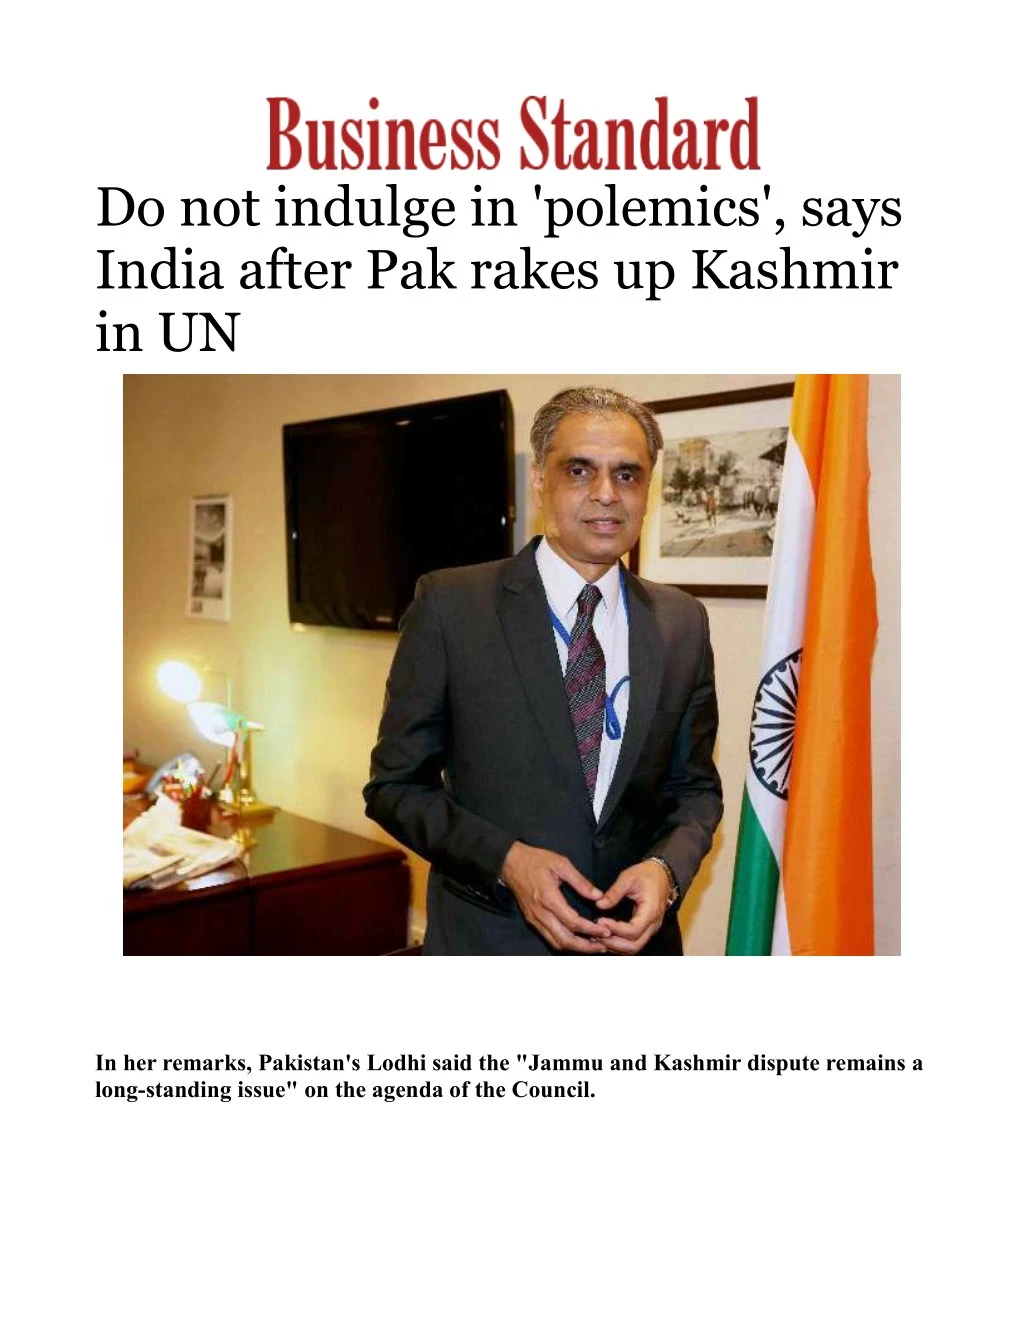 do not indulge in polemics says india after